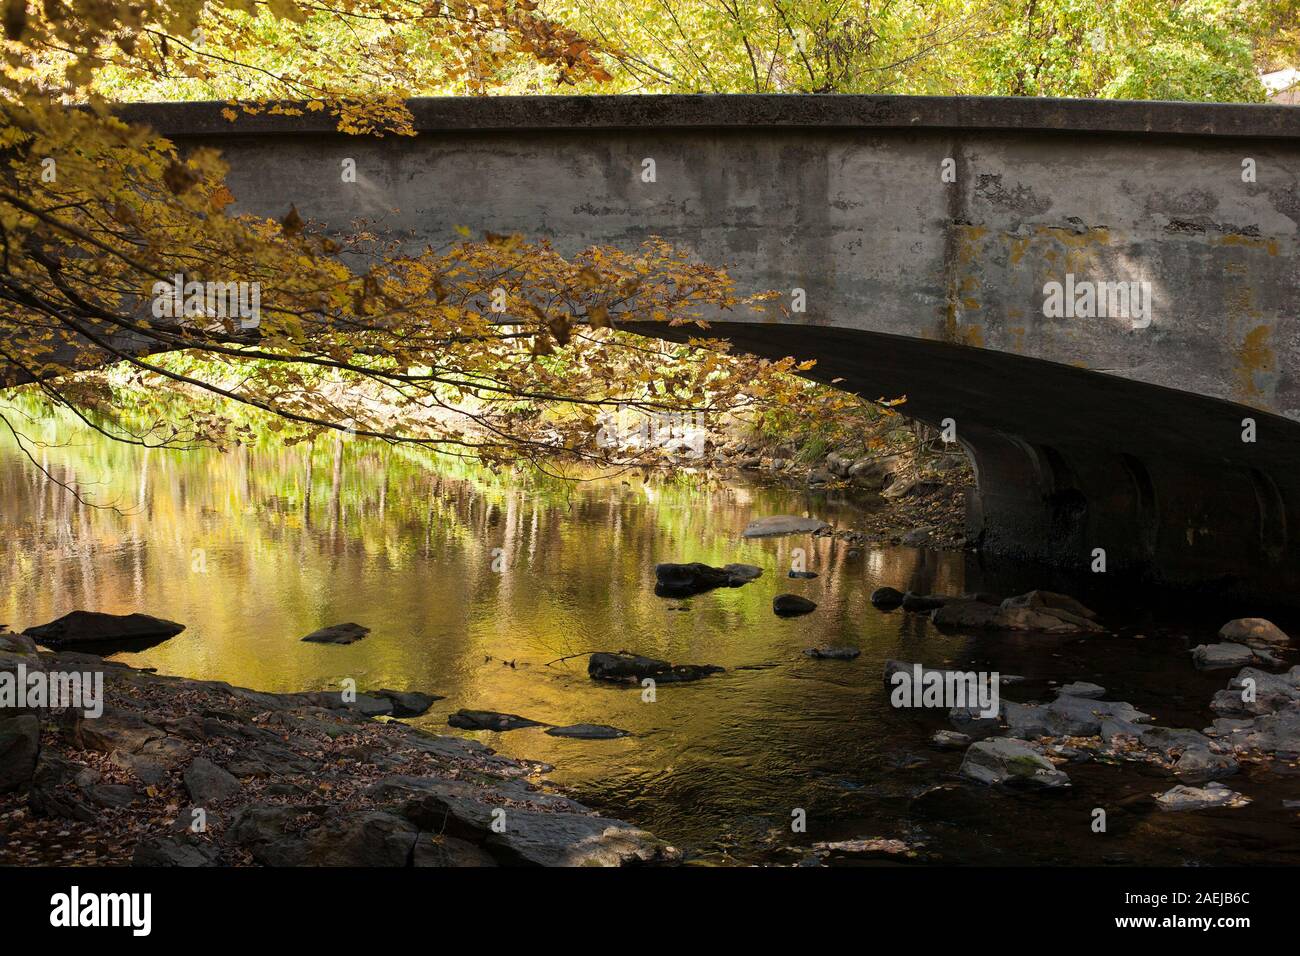 Small bridge arches across the Mill River in Williamsburg, Massachusetts in the fall. Stock Photo